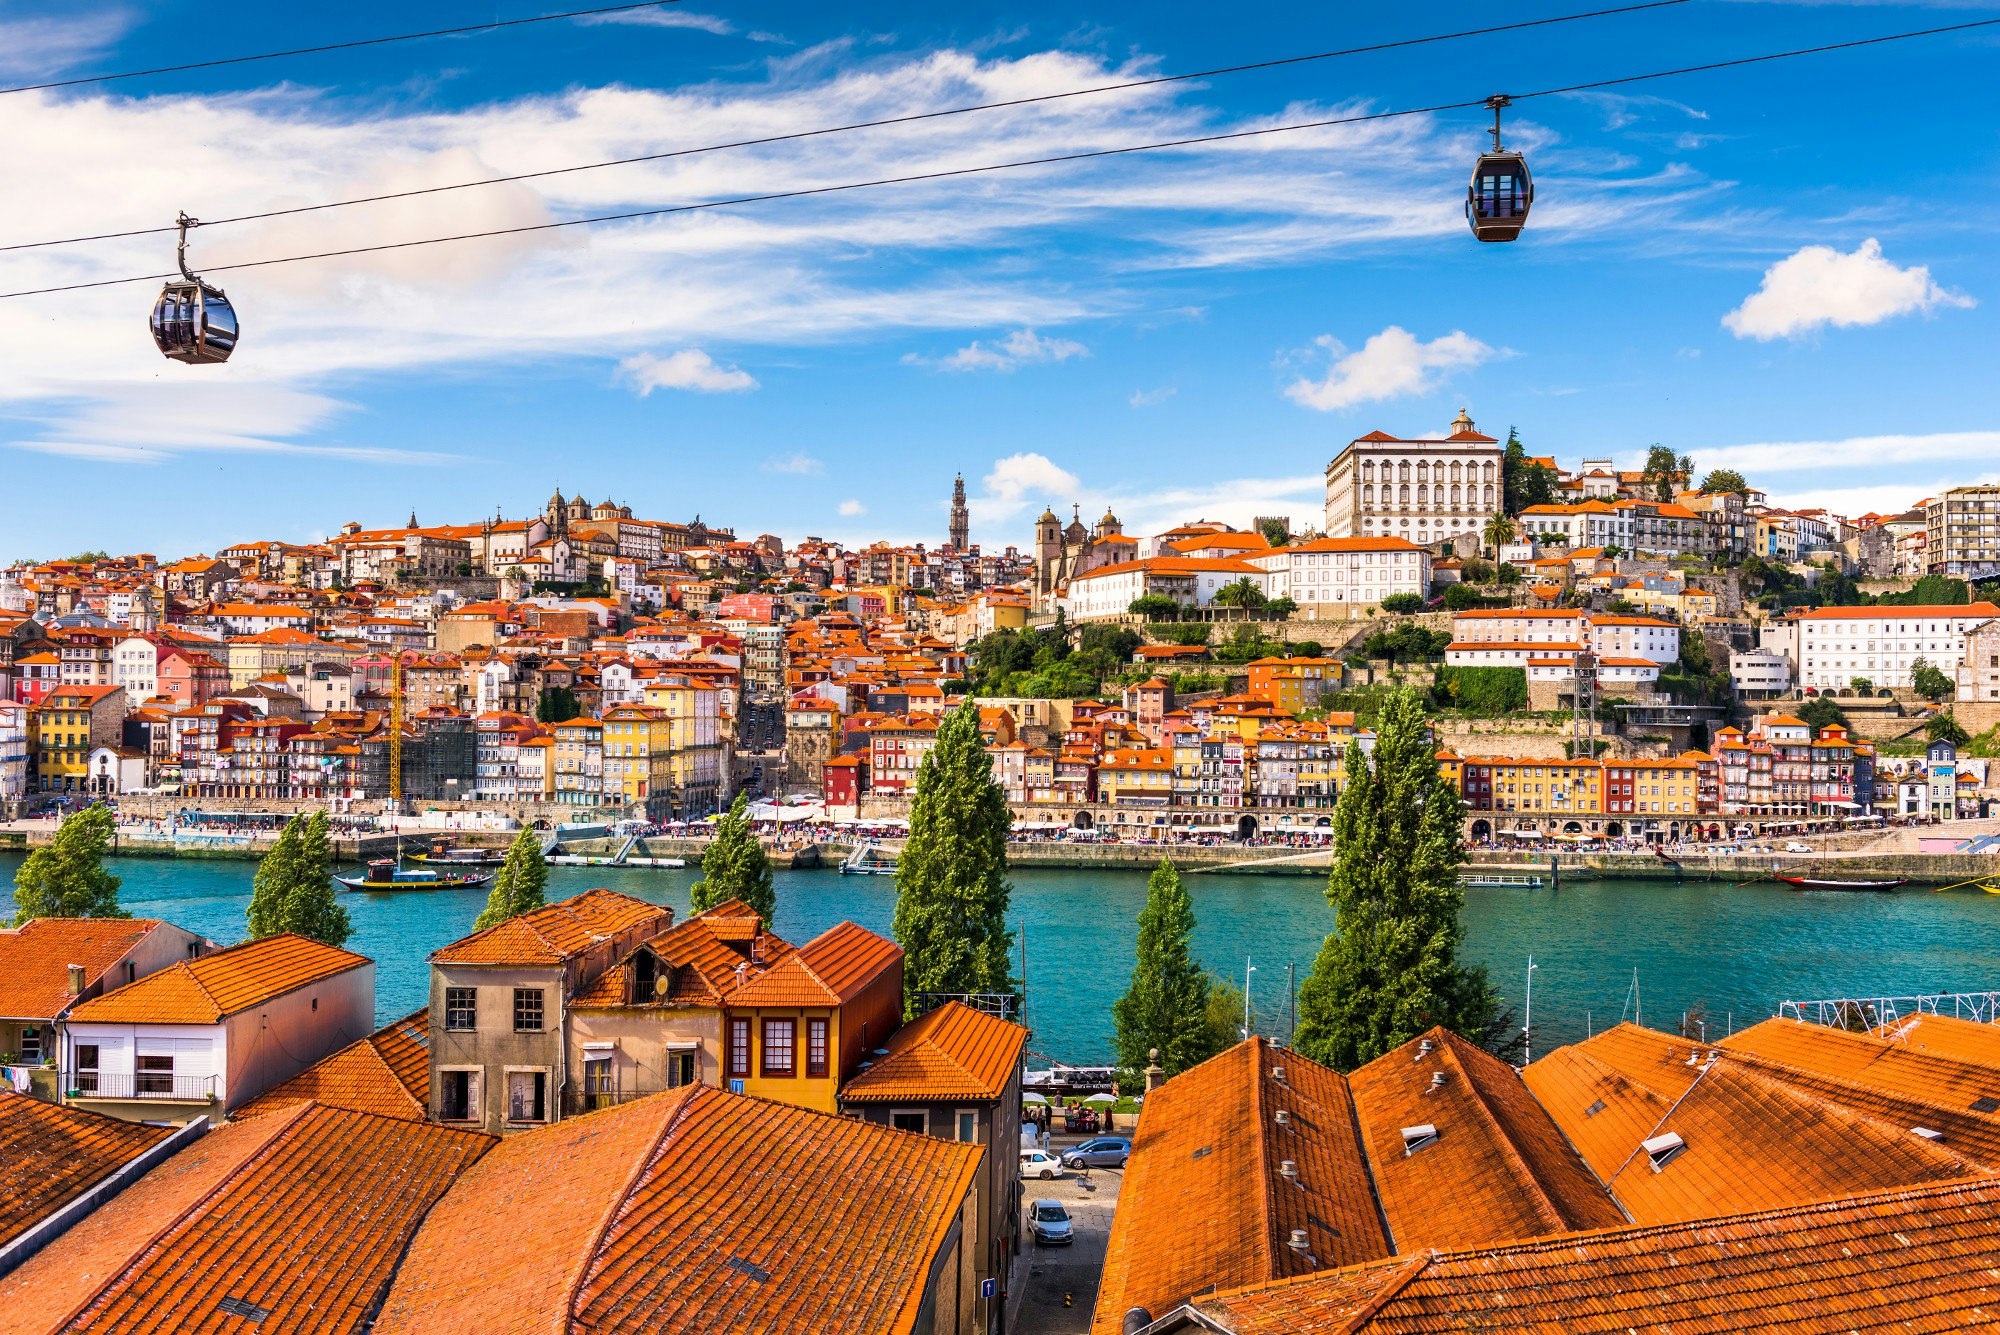 Porto took the second position in the index, coming out as most liveable place in the world.